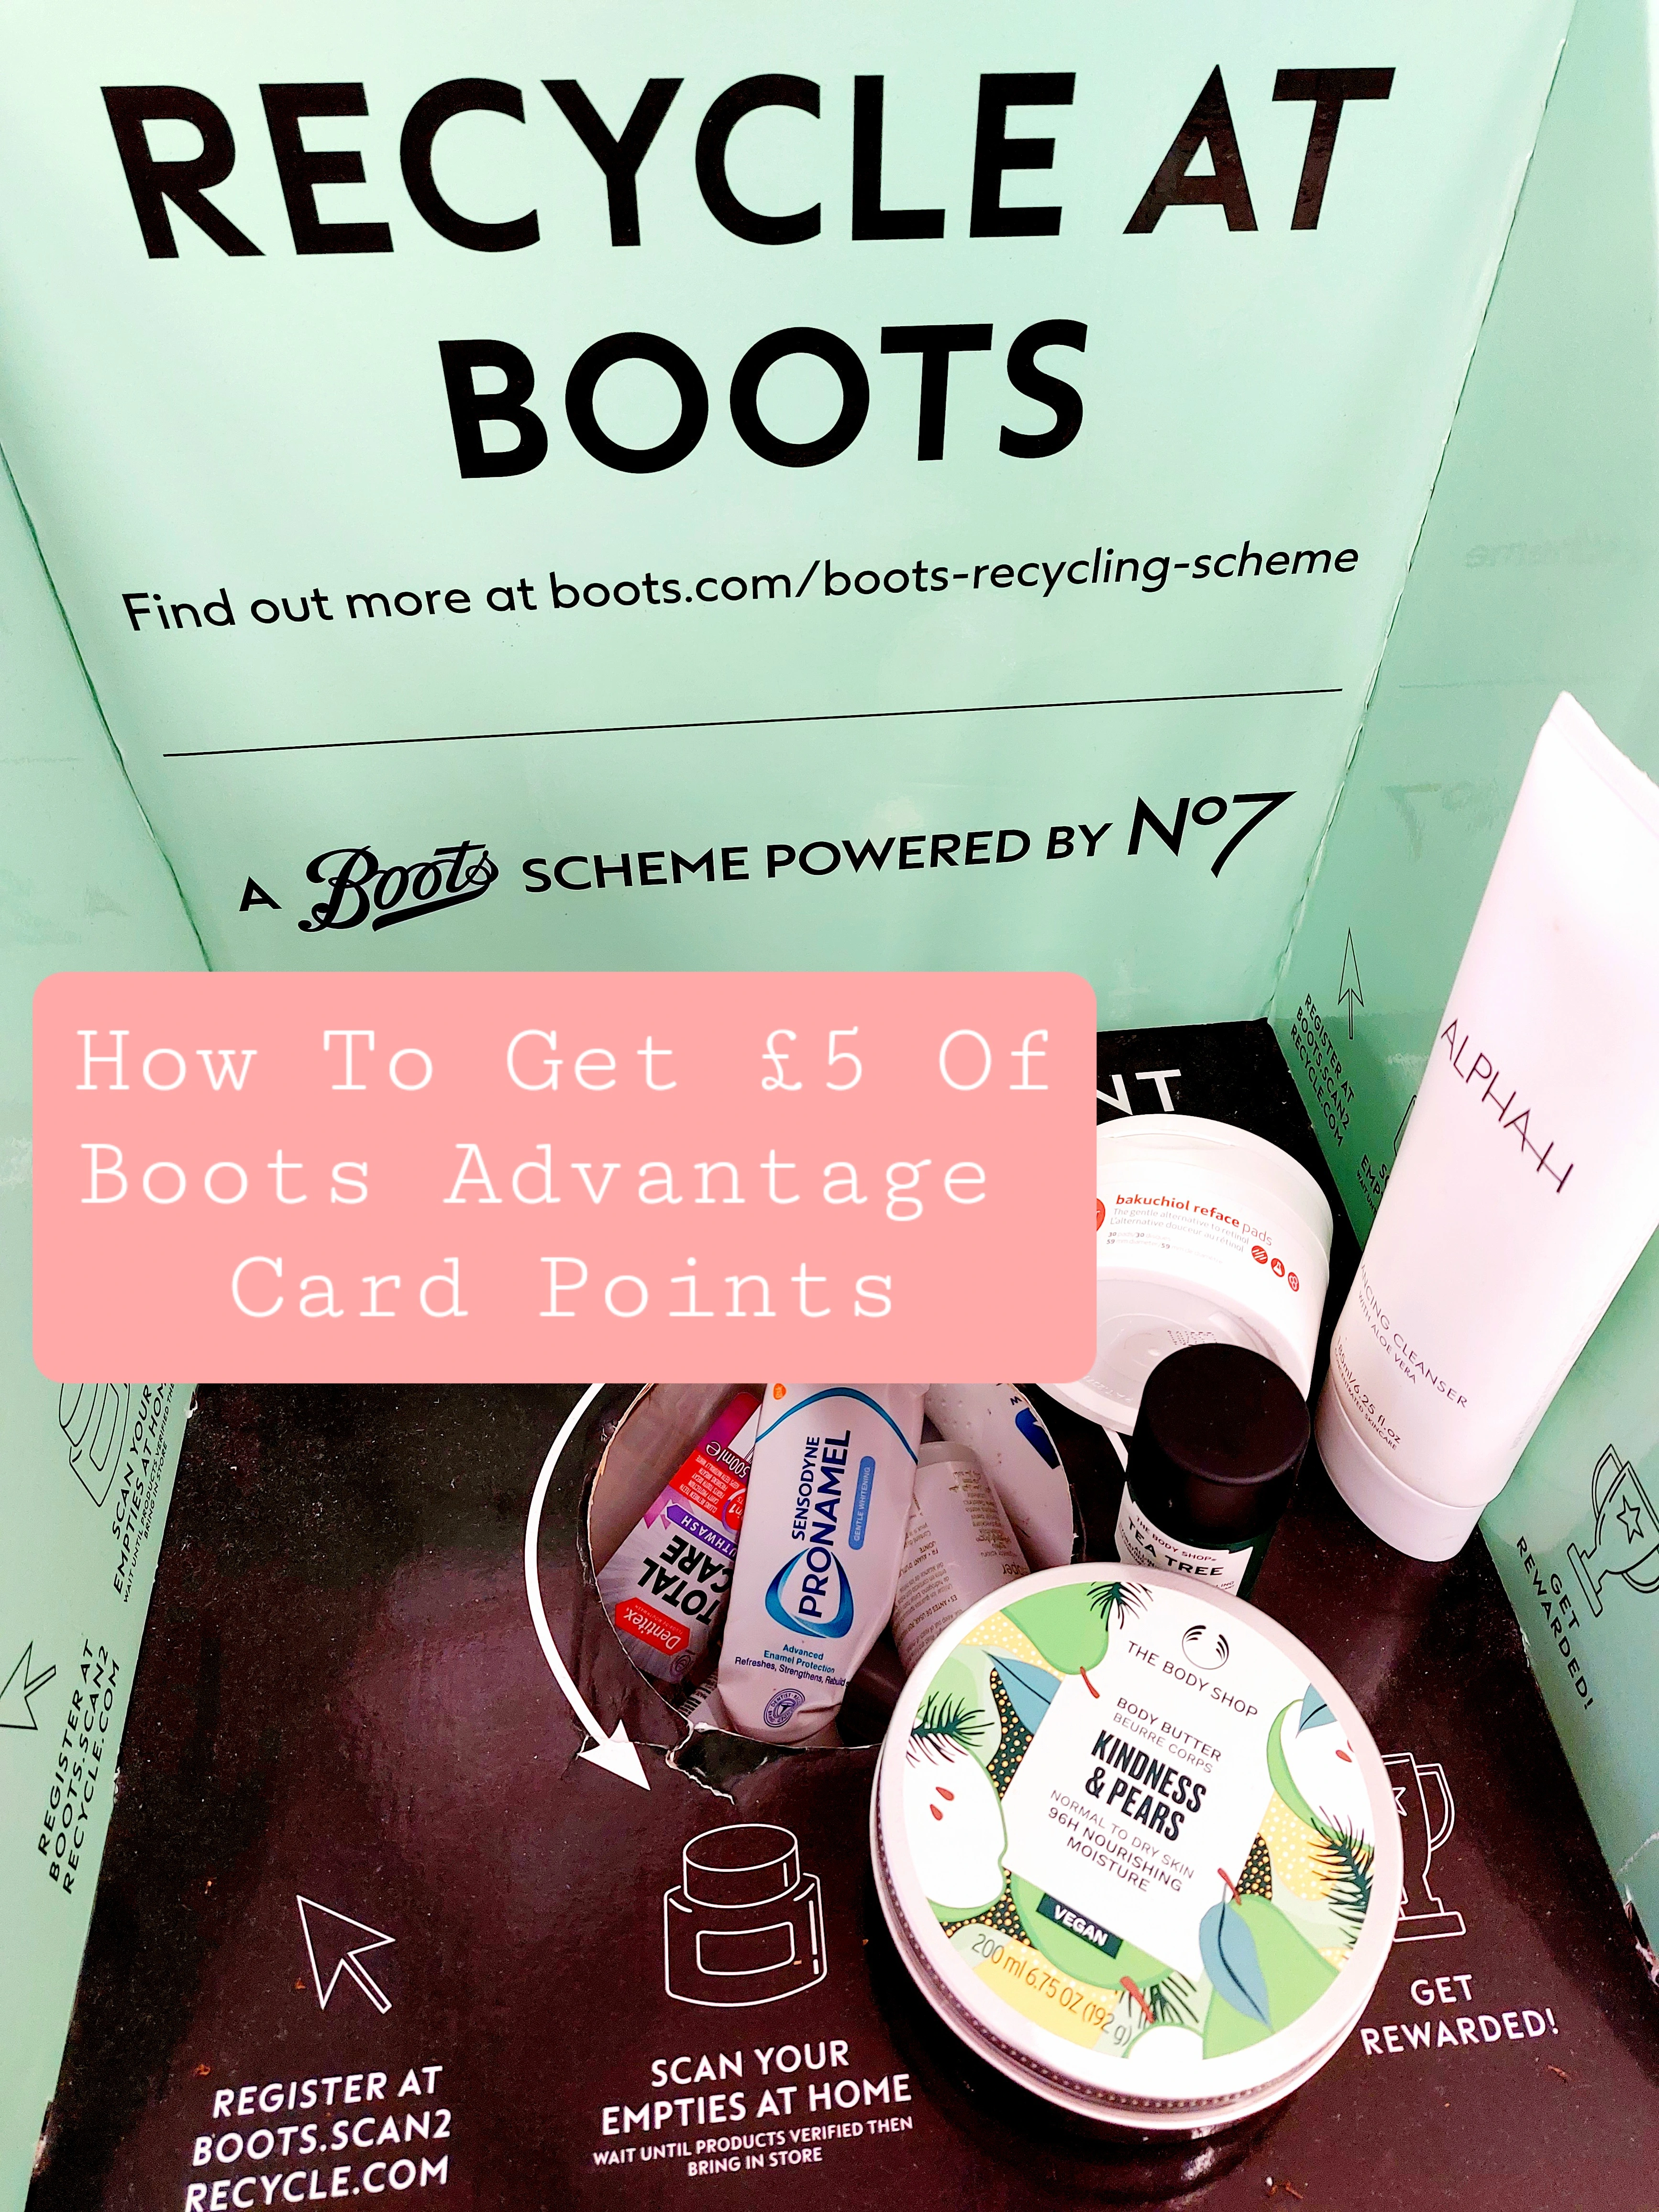 How to use Boots recycling scheme - Scan 2 Recycle for £5 of advantage card points